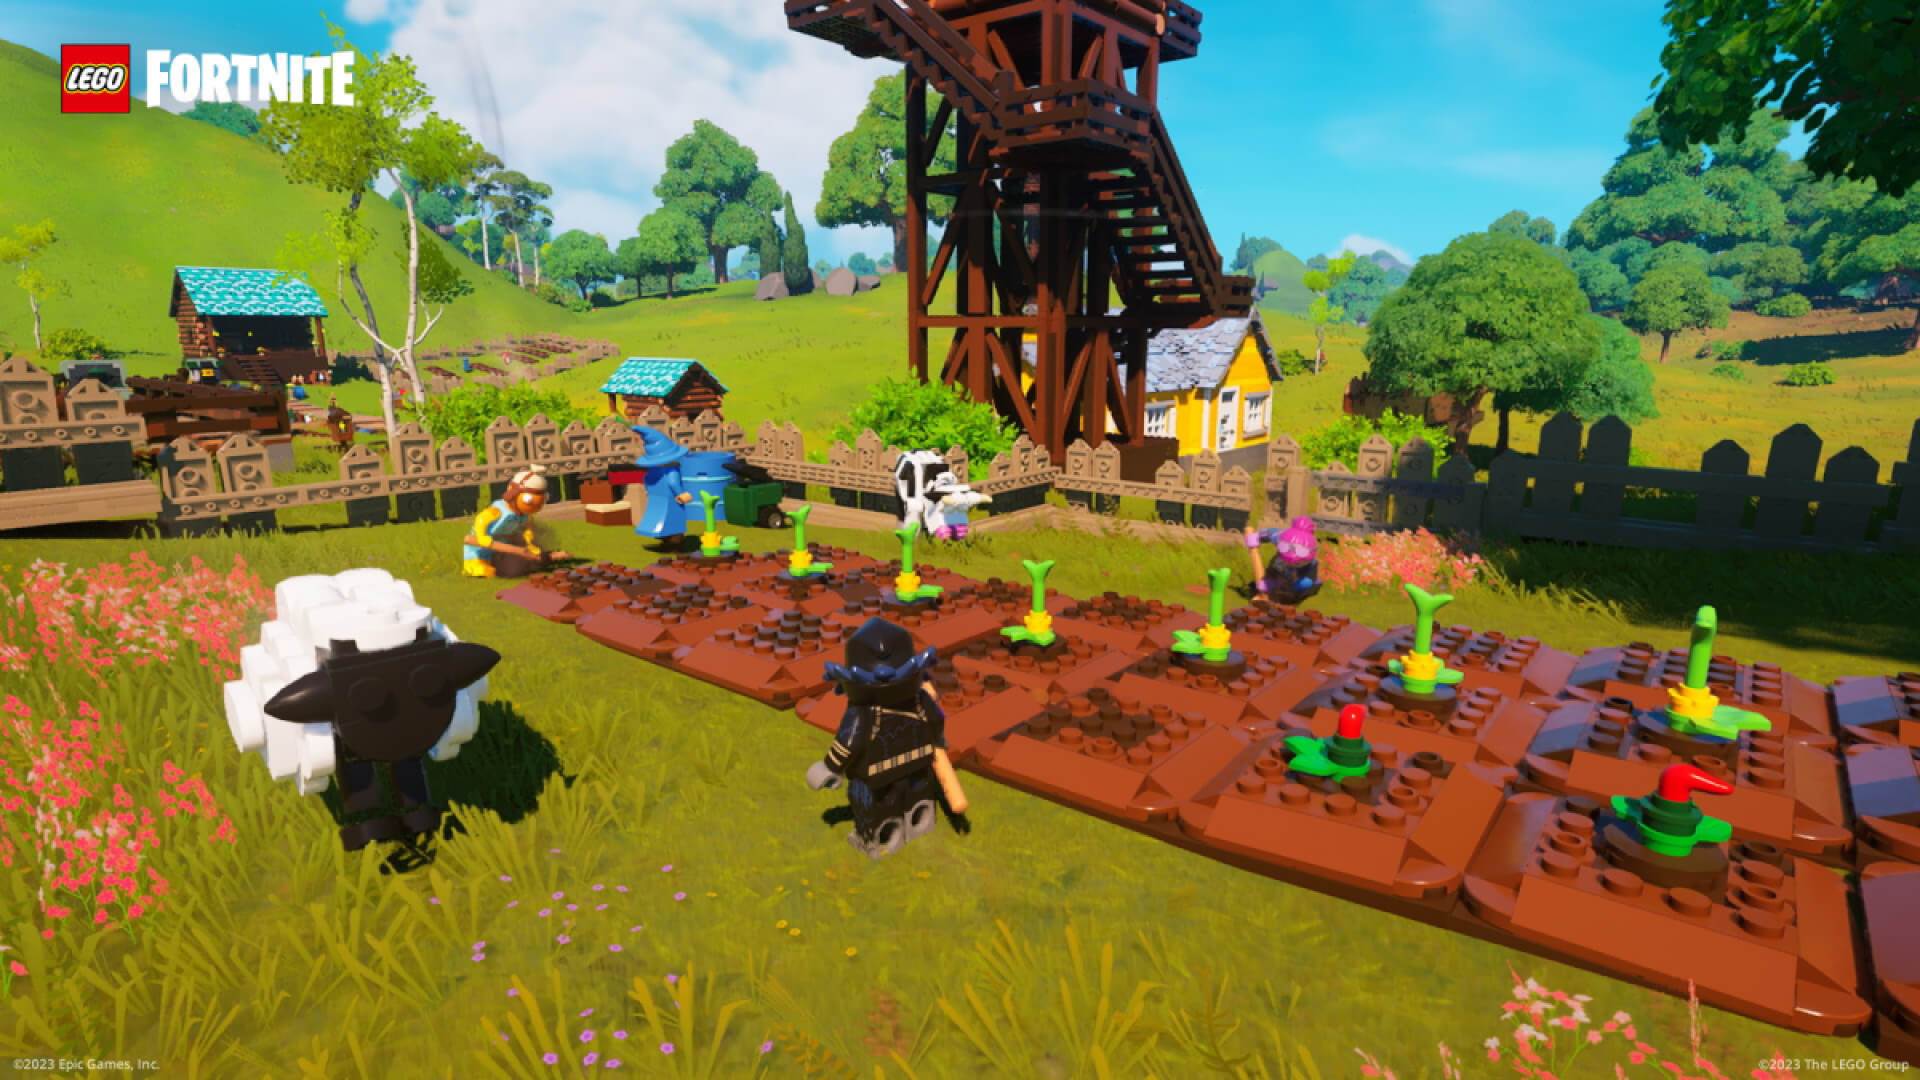 An example of a village in LEGO Fortnite